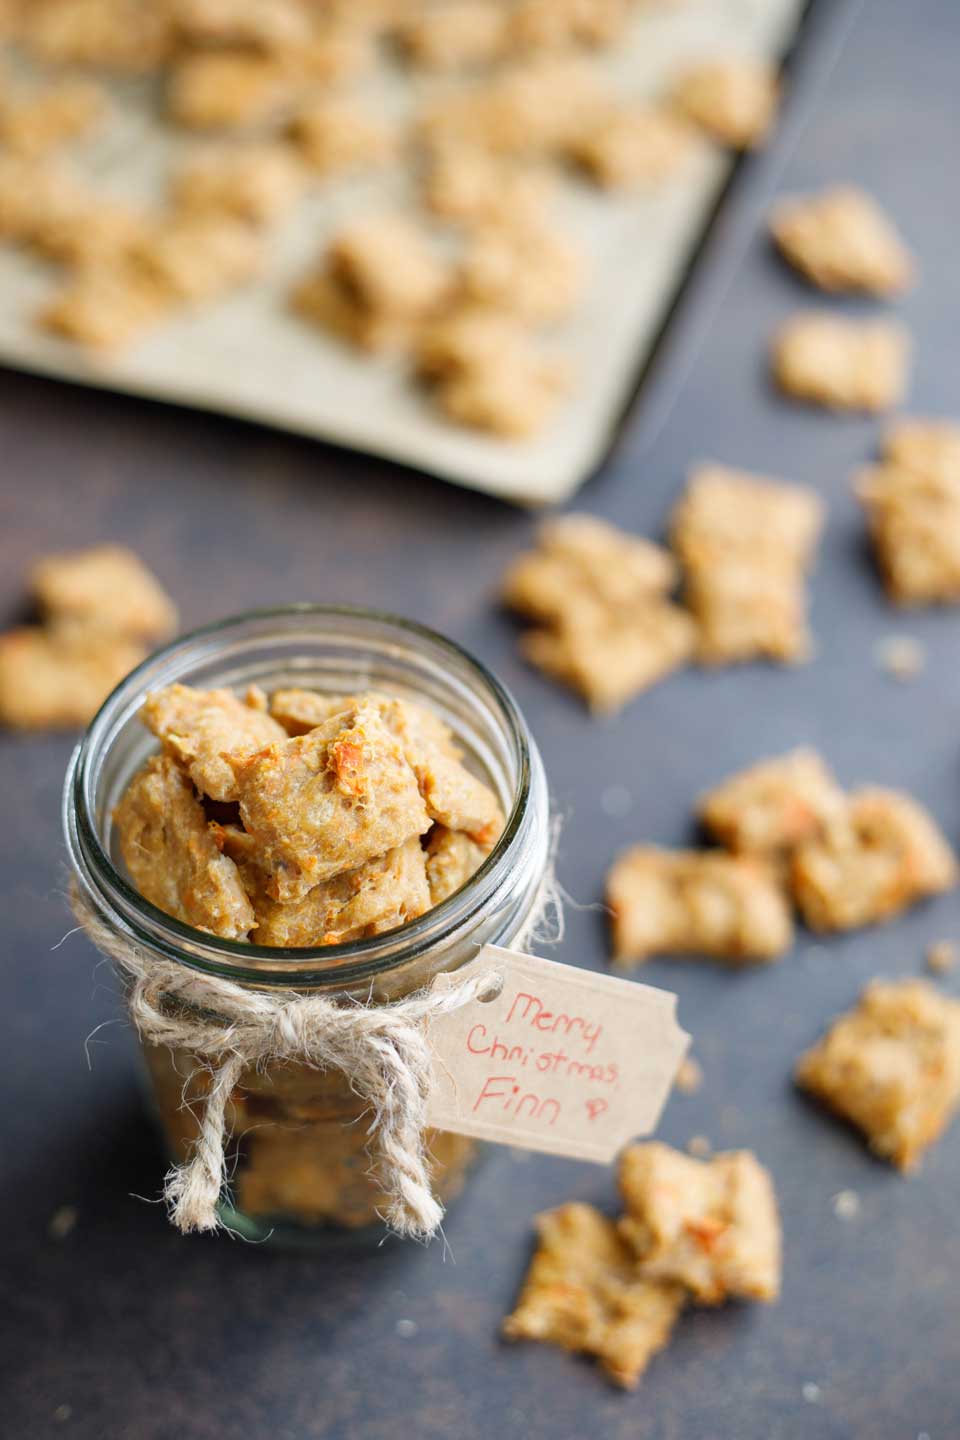 Easy homemade dog treats that your pups will go mad for! Aniseed is like catnip to dogs!